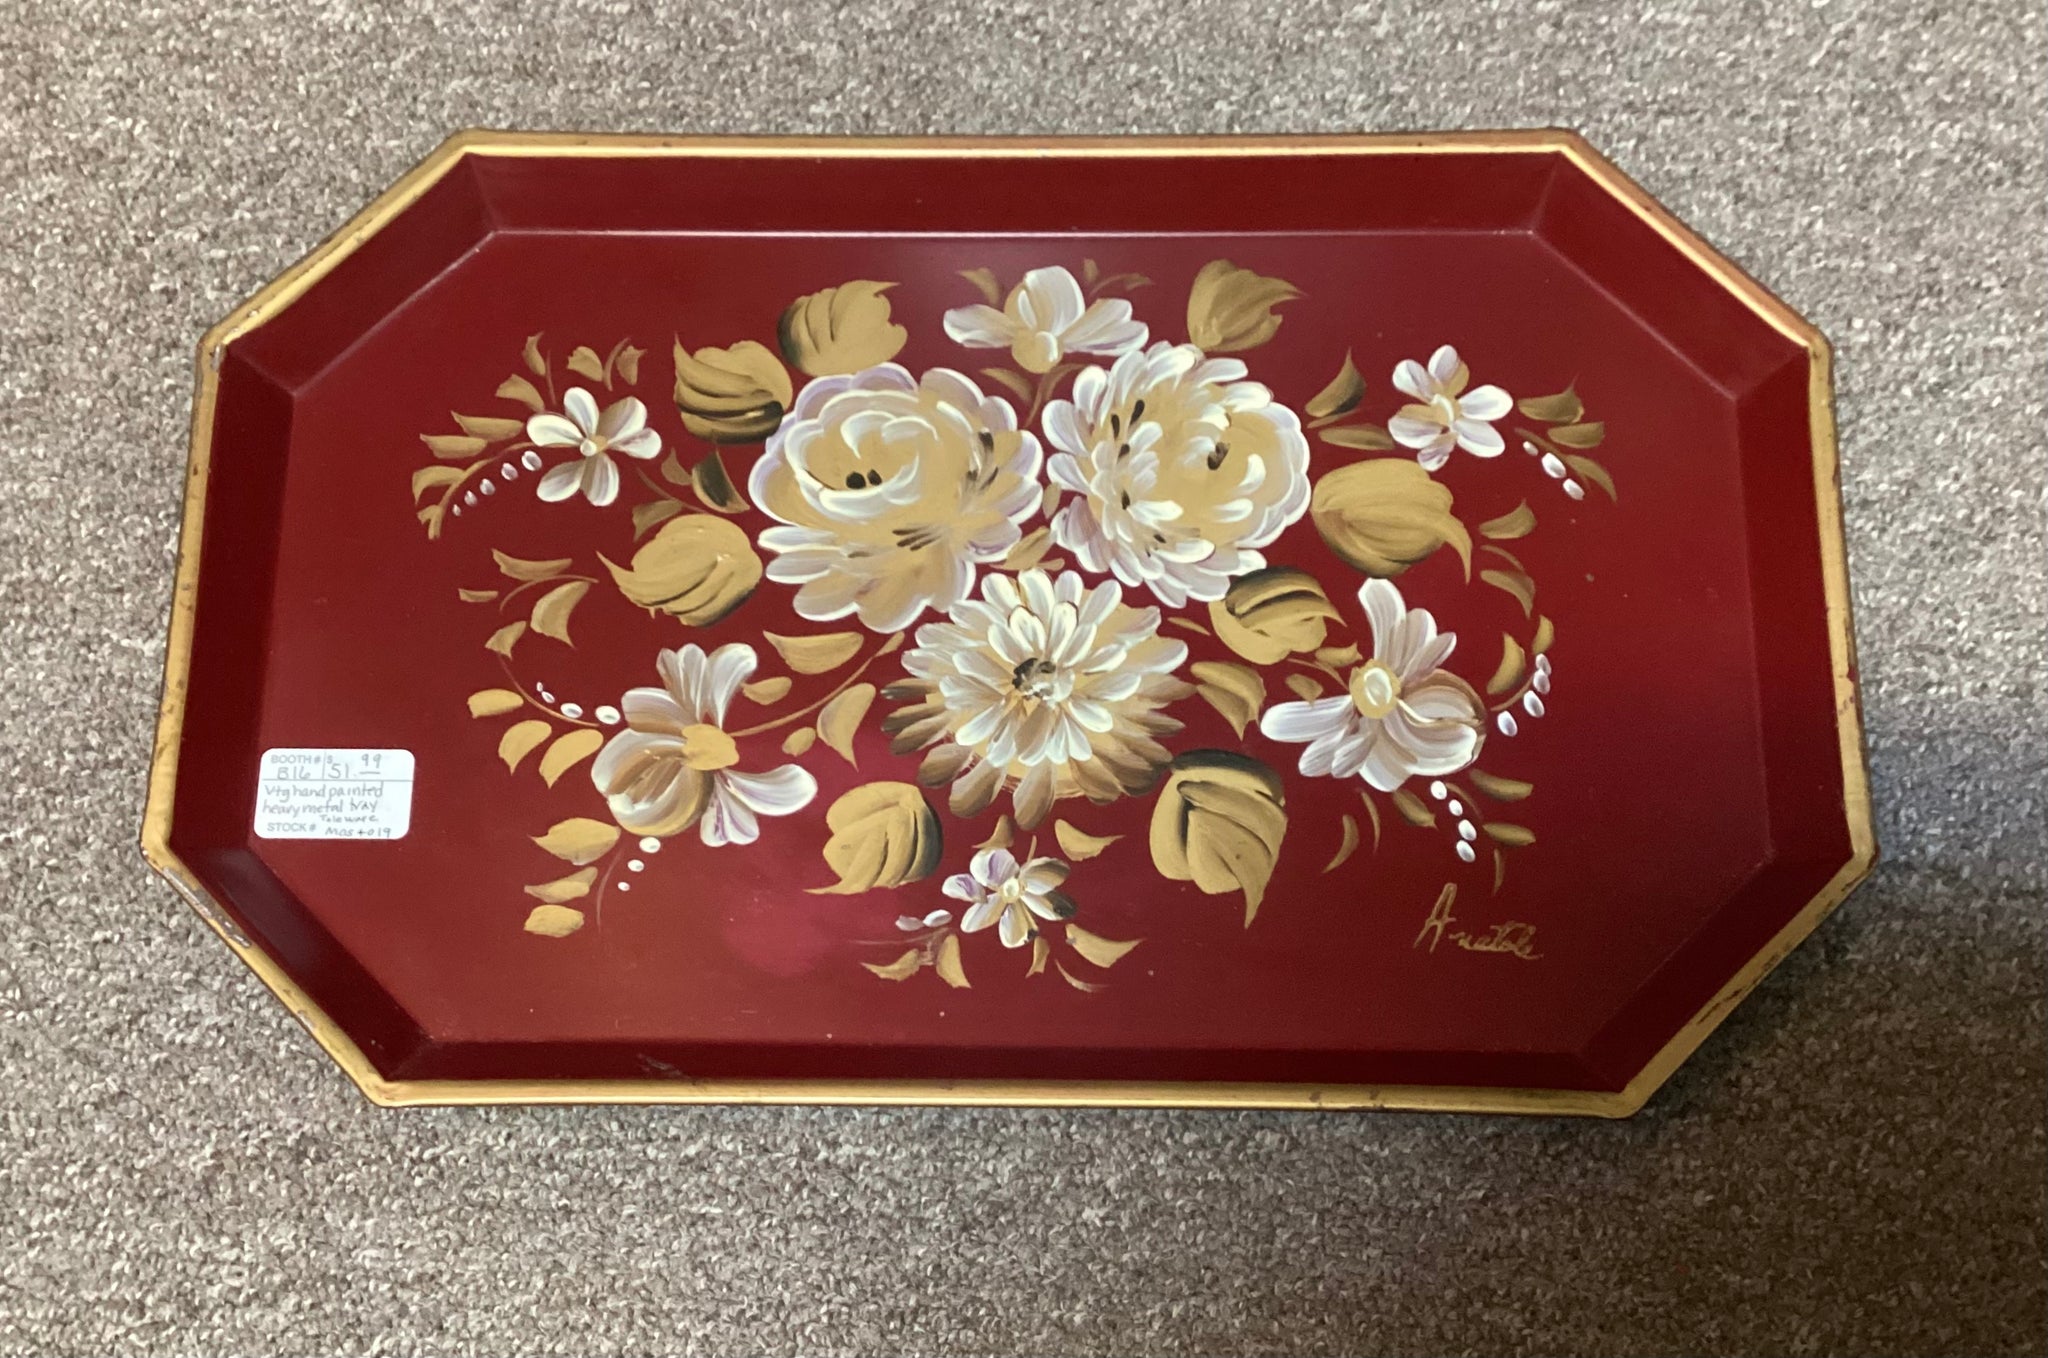 Tole Painted Red Metal Serving Tray